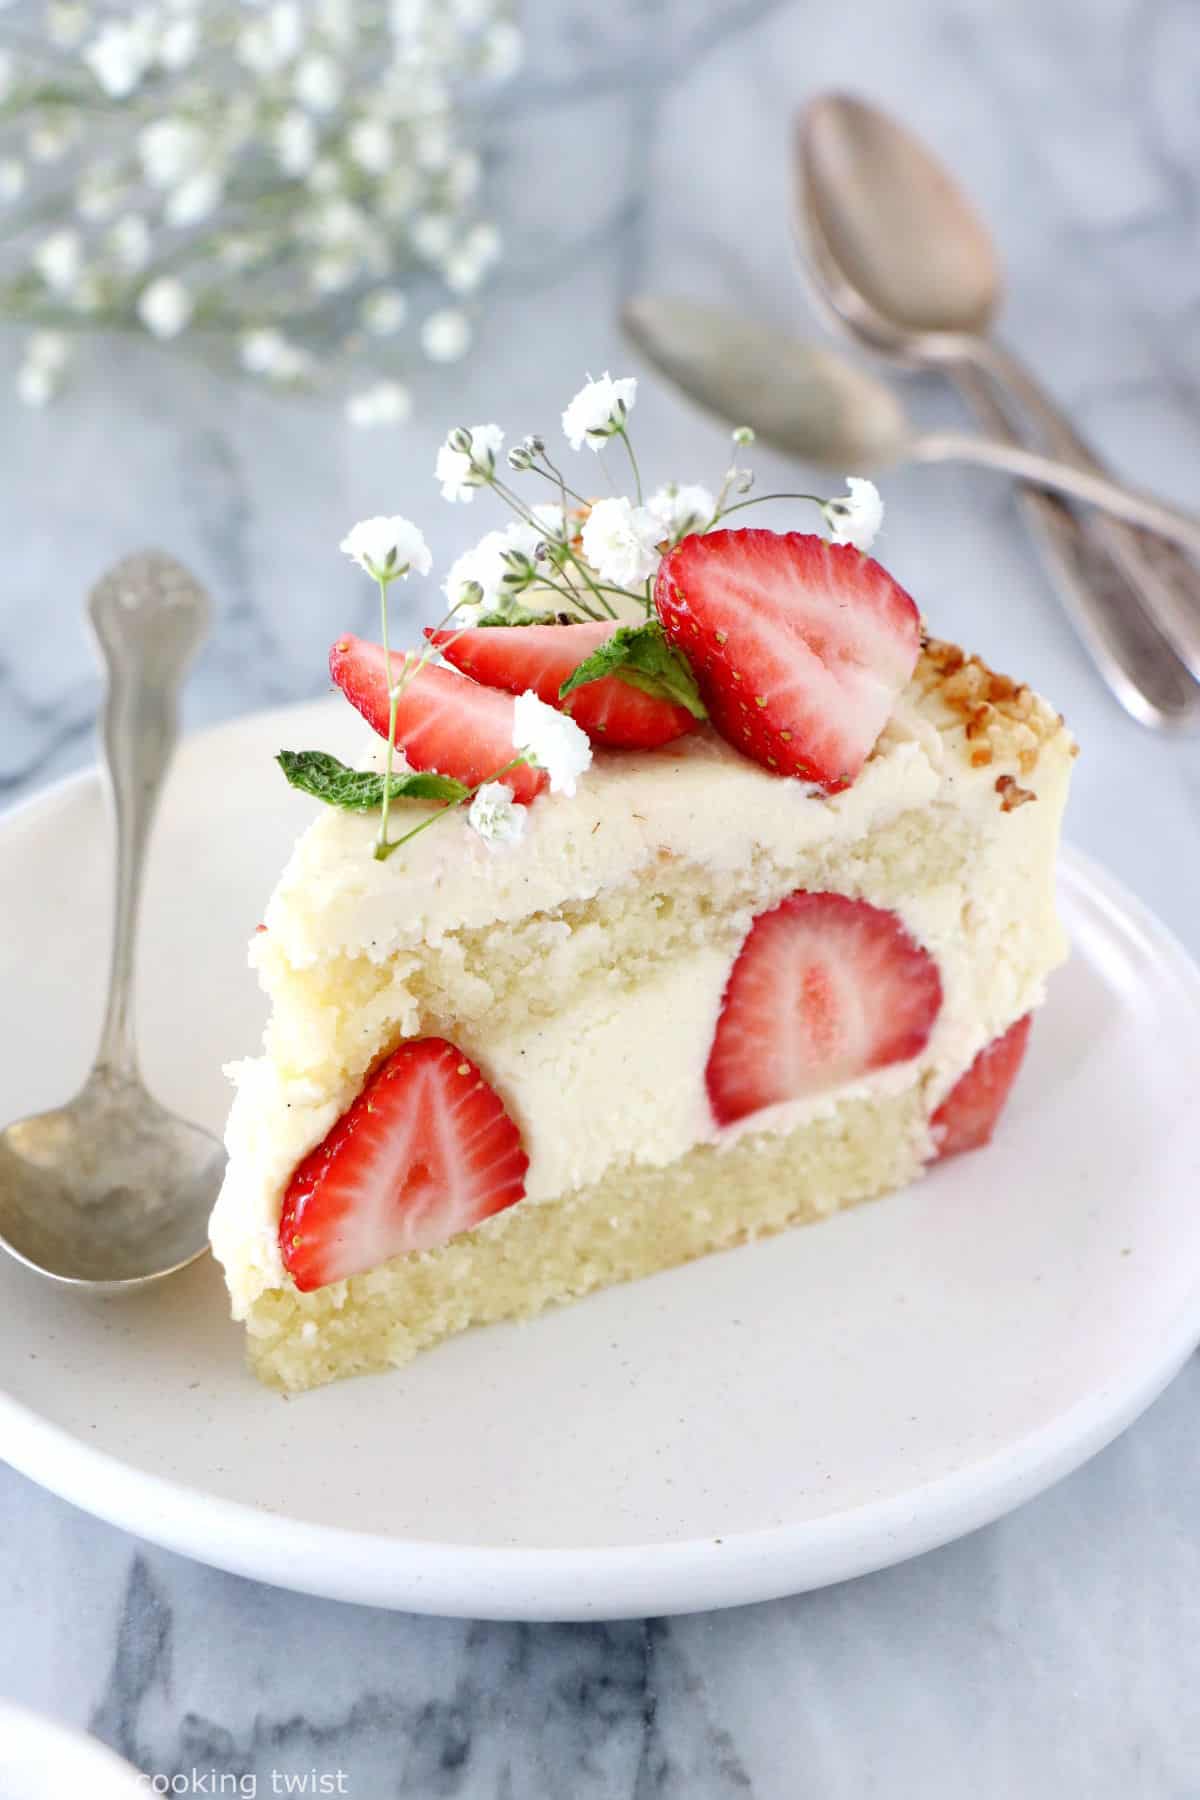 Fraisier cake is a traditional French strawberry cake, consisting of two layers of genoise sponge, filled with a silky delicious vanilla mousseline cream and fresh strawberries.